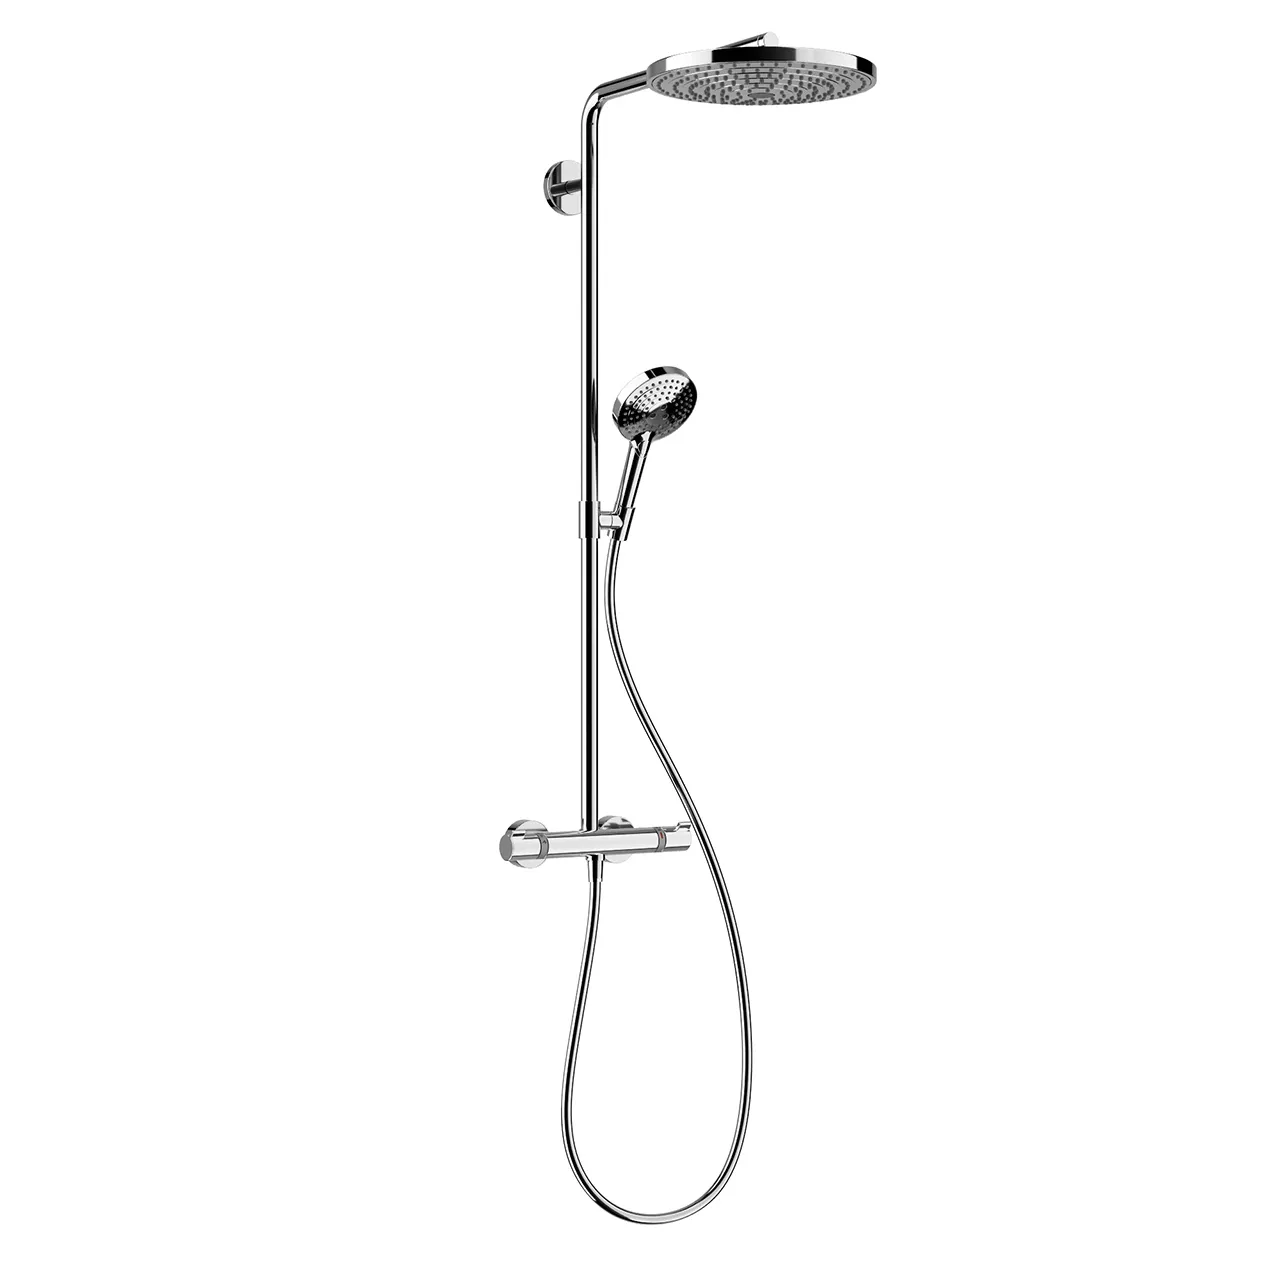 Bathroom – raindance-select-s-shower-300-thermostat-by-hansgrohe